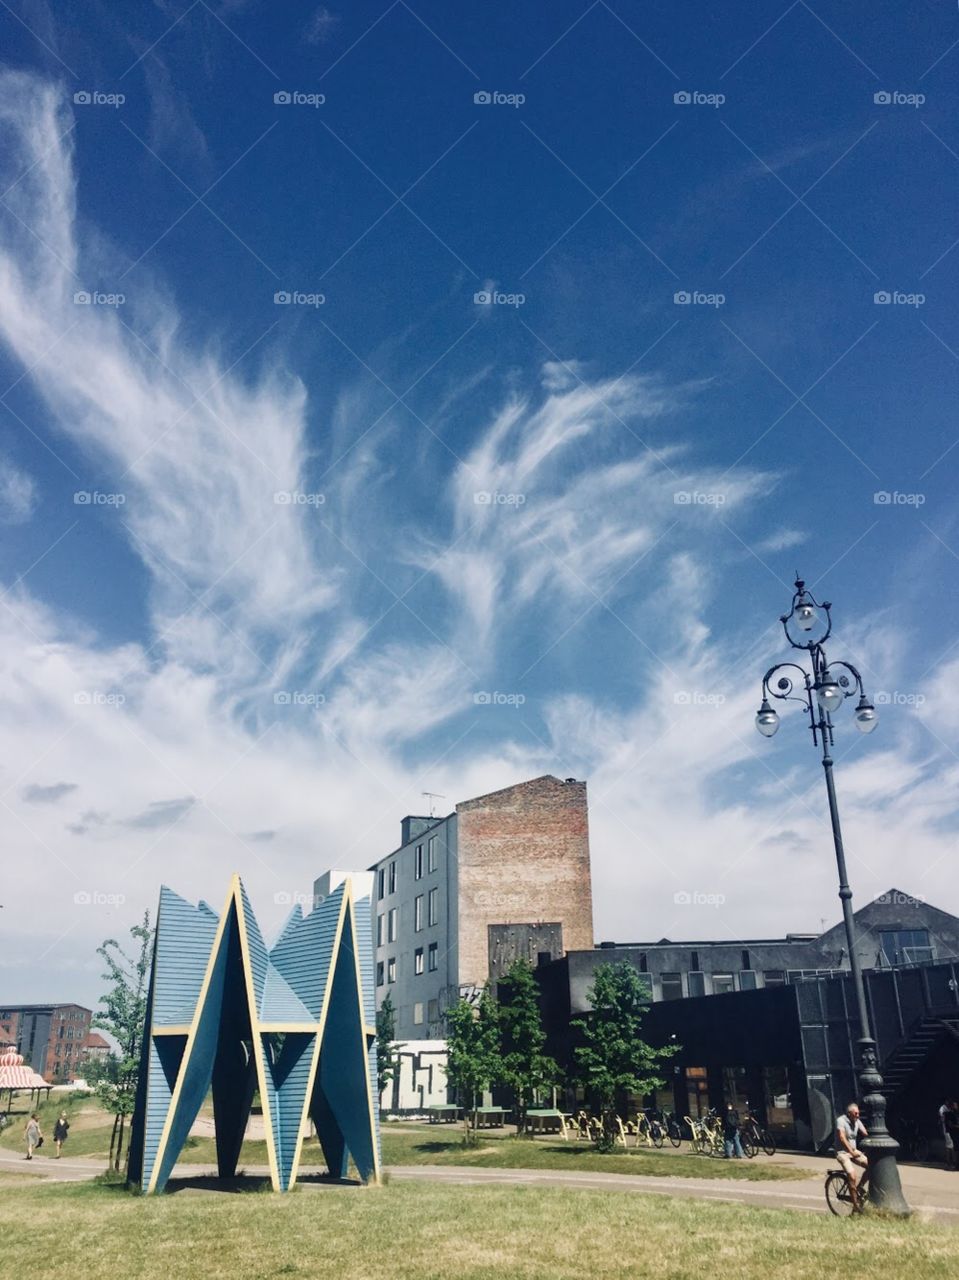 Art installation in an urban park under the clear blue sky filled with wispy clouds